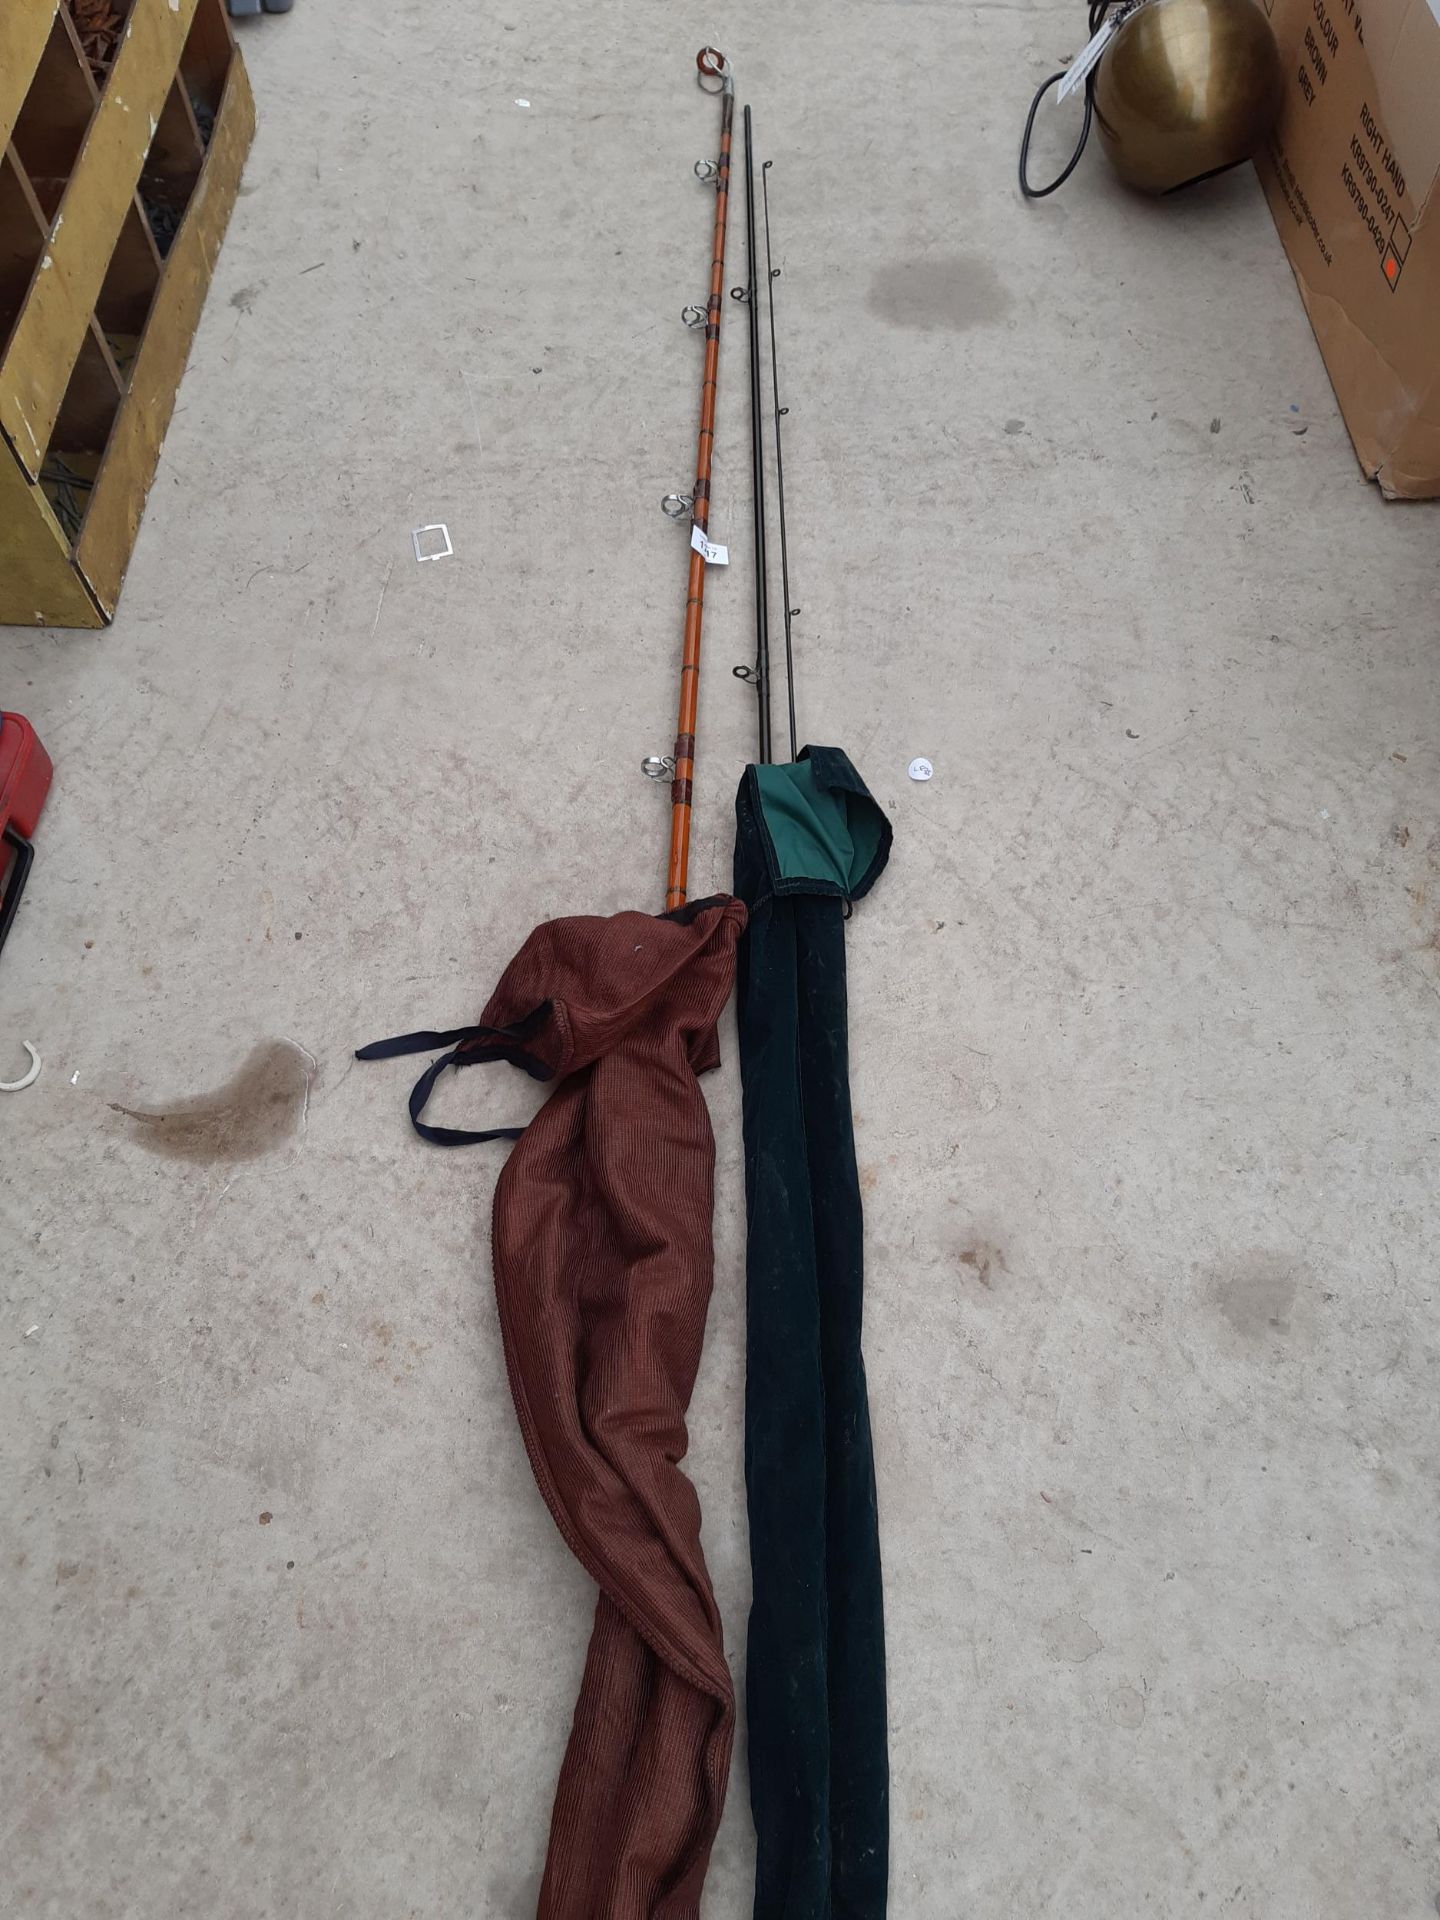 TWO VINTAGE FISHING RODS